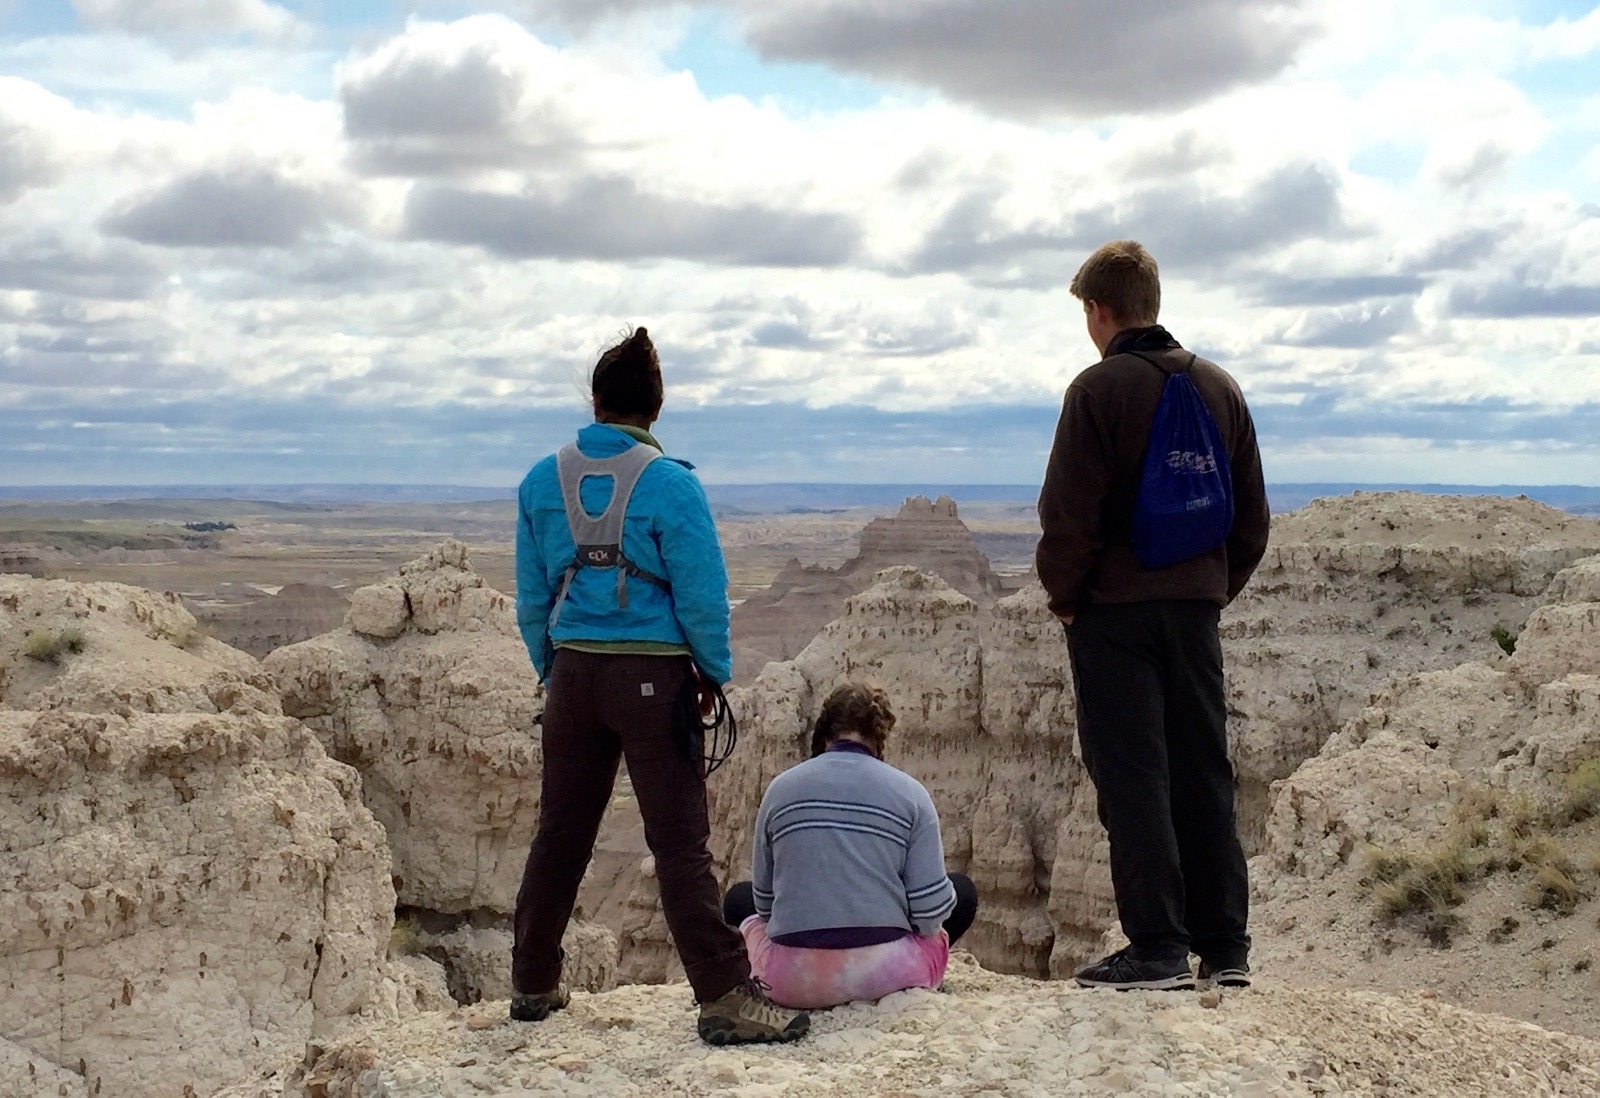 Millennial-aged students, part of Whitman College's prestigious &quot;Semester in the West&quot; program stand in Badlands National Park on the Pine Ridge Indian Reservation. Millennials everywhere are standing up and making a difference.  Photo by Todd Wilkinson